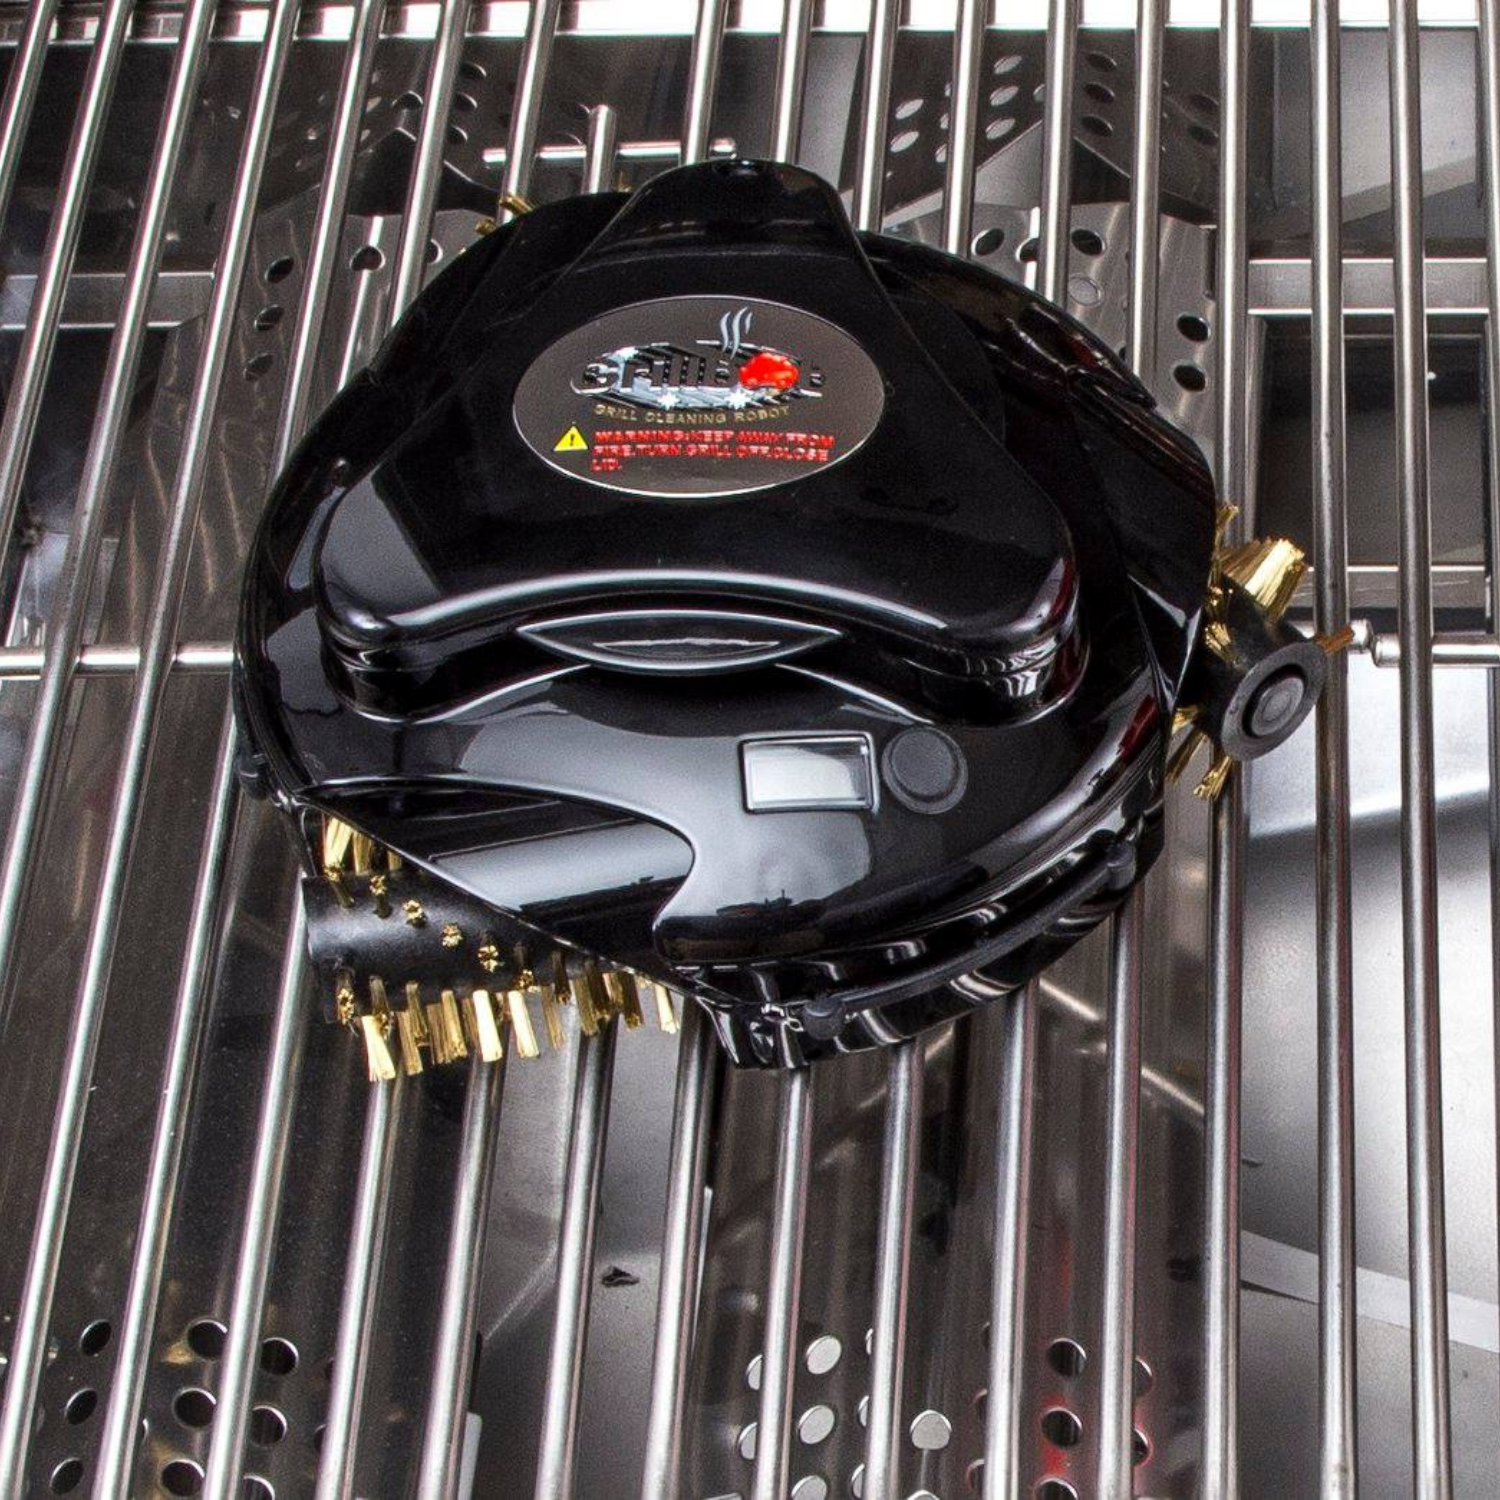 The Grillbot Dances Across Your Barbecue to Clean the Grill